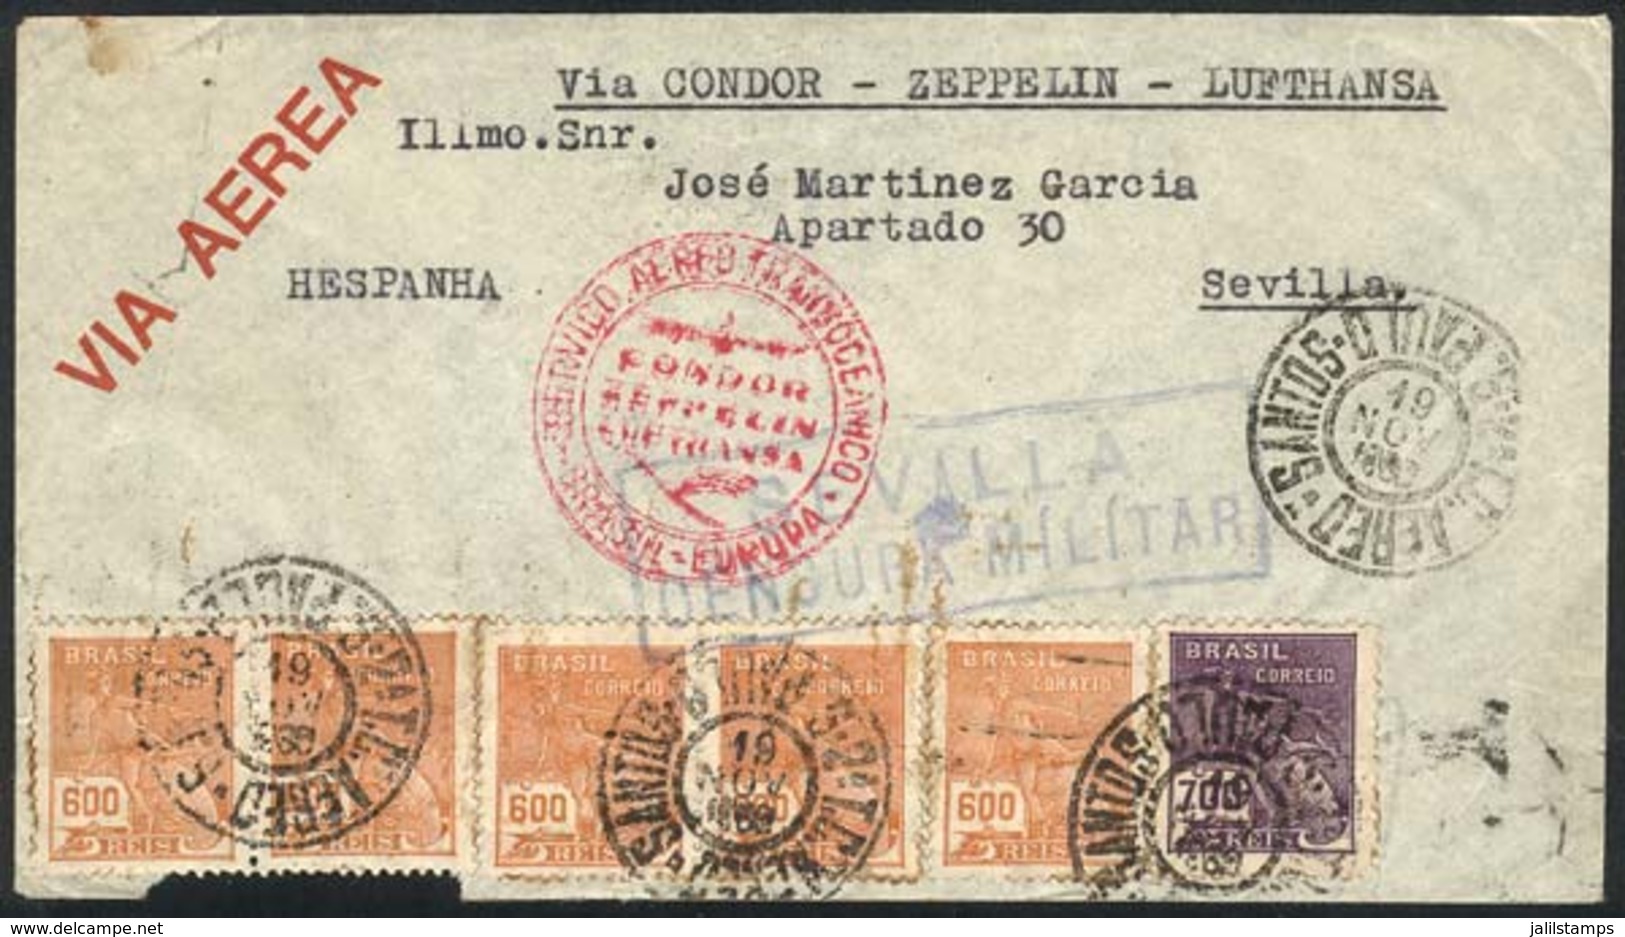 BRAZIL: Airmail Cover Sent From Santos To Sevilla On 19/NO/1936 Franked With 3,700Rs., On Front CENSOR Mark Of Sevilla,  - Cartoline Maximum